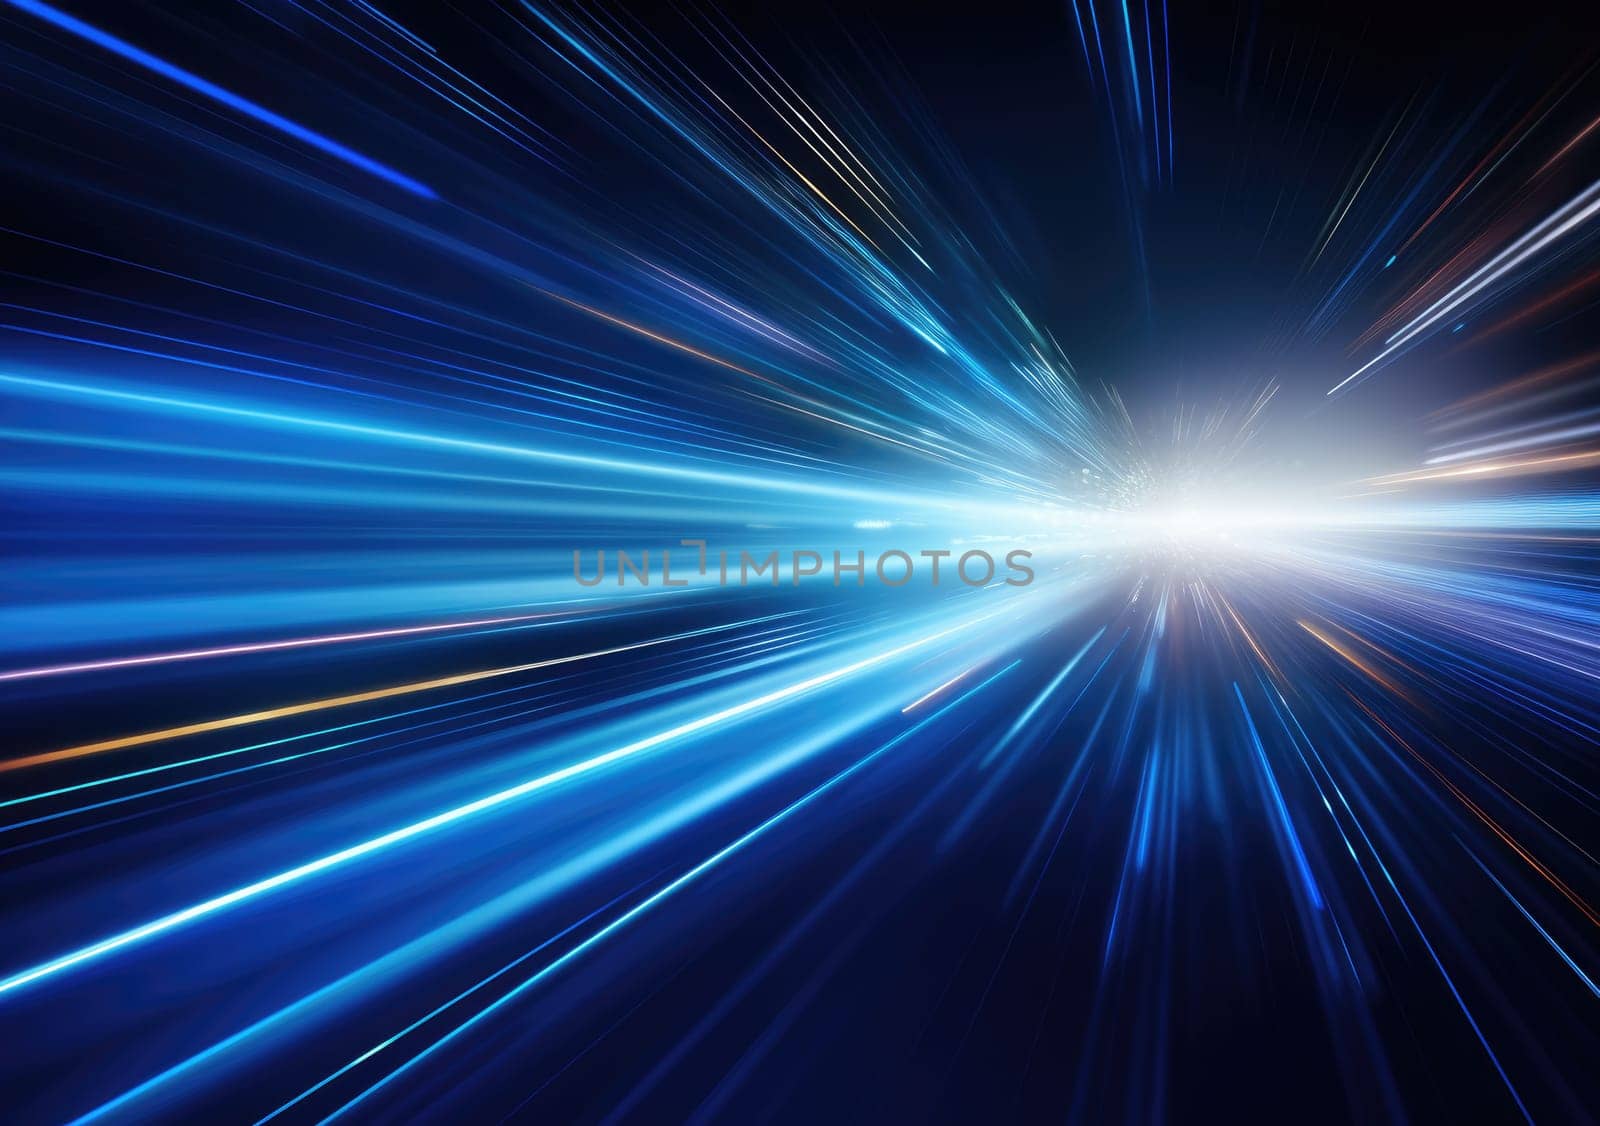 High speed. Abstract technology background concept.Speed movement pattern and motion blur over dark blue background by PeaceYAY